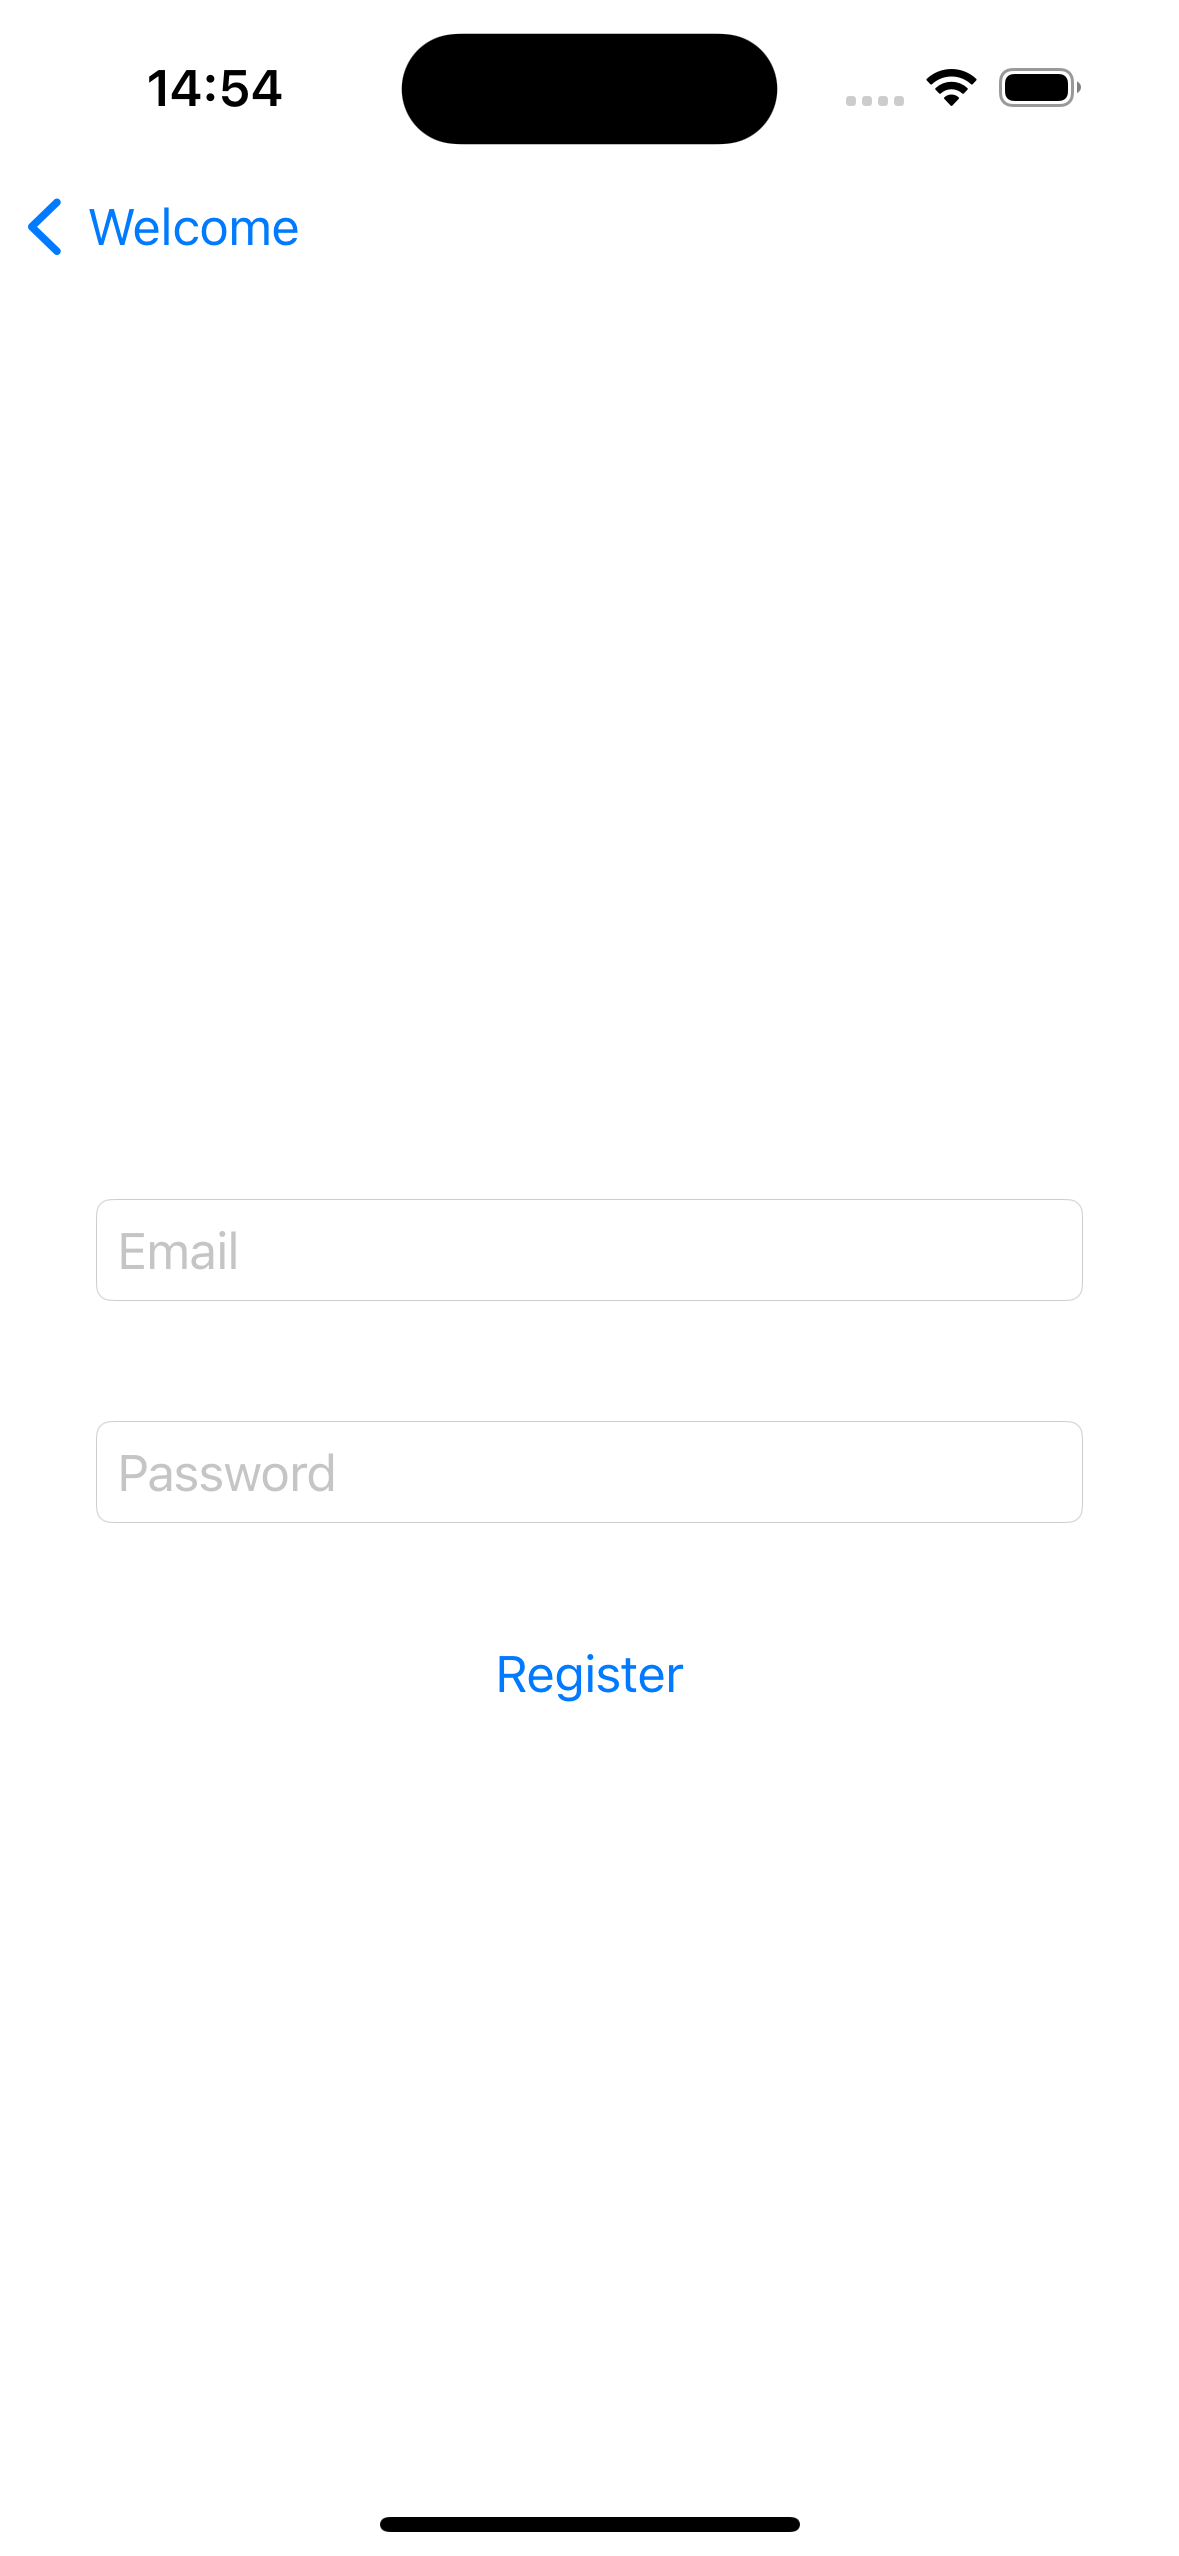 The app shows an email and password field and register button